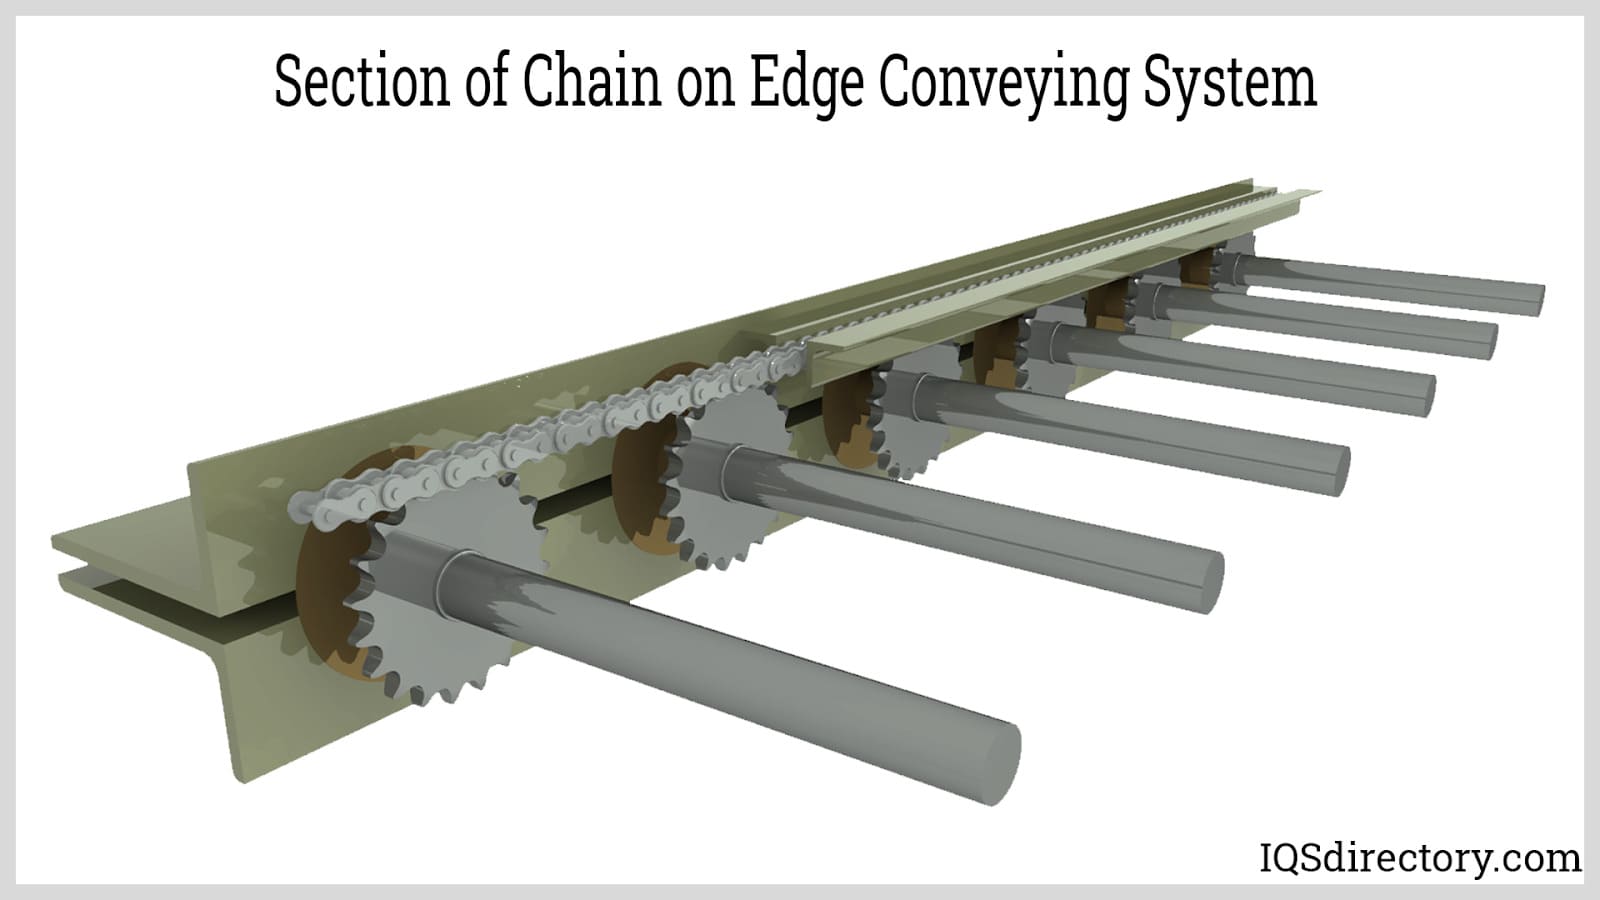 Section of Chain on Edge Conveying System